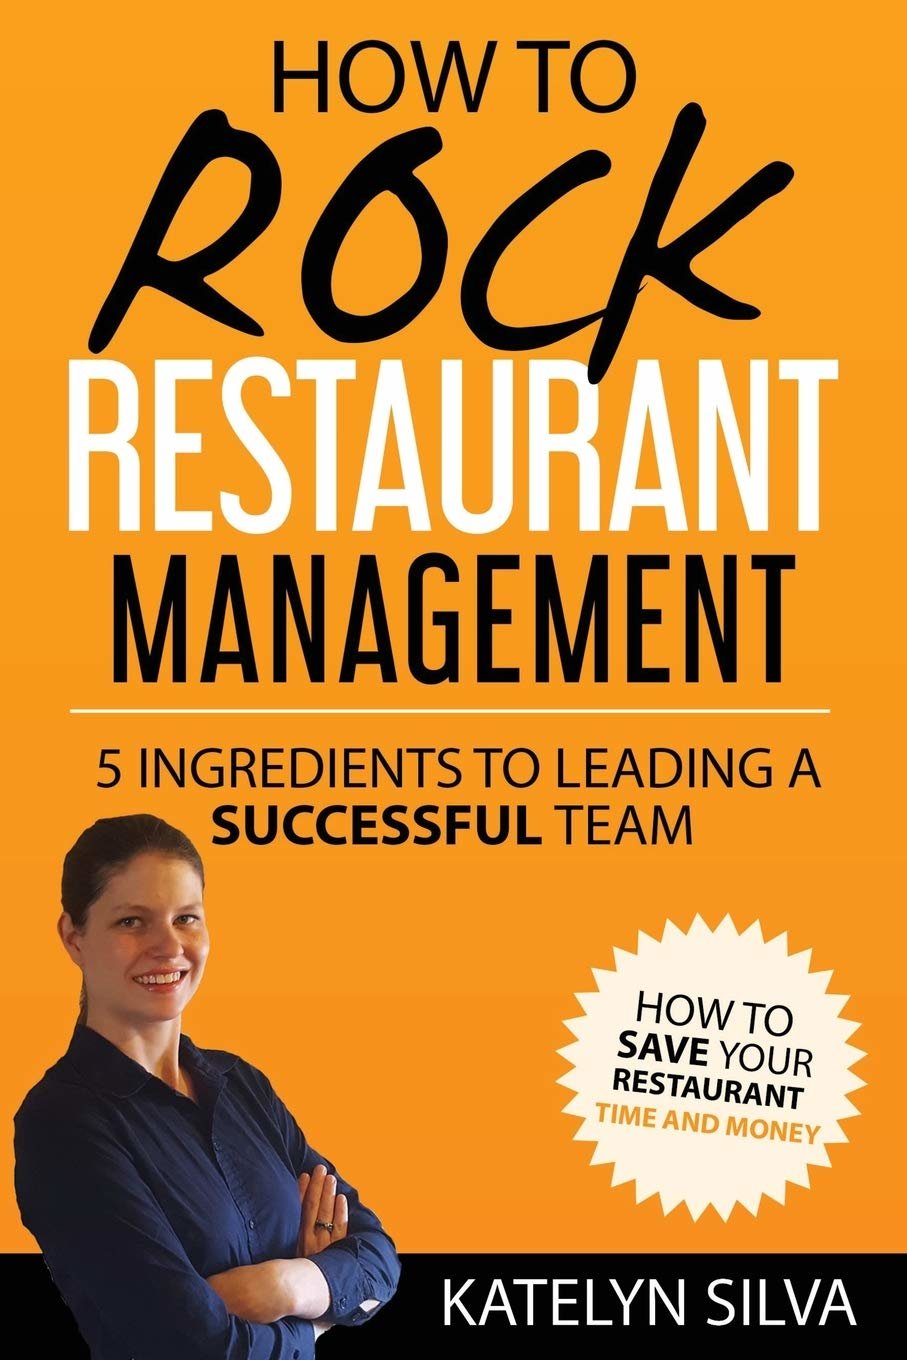 How to rock restaurant management book